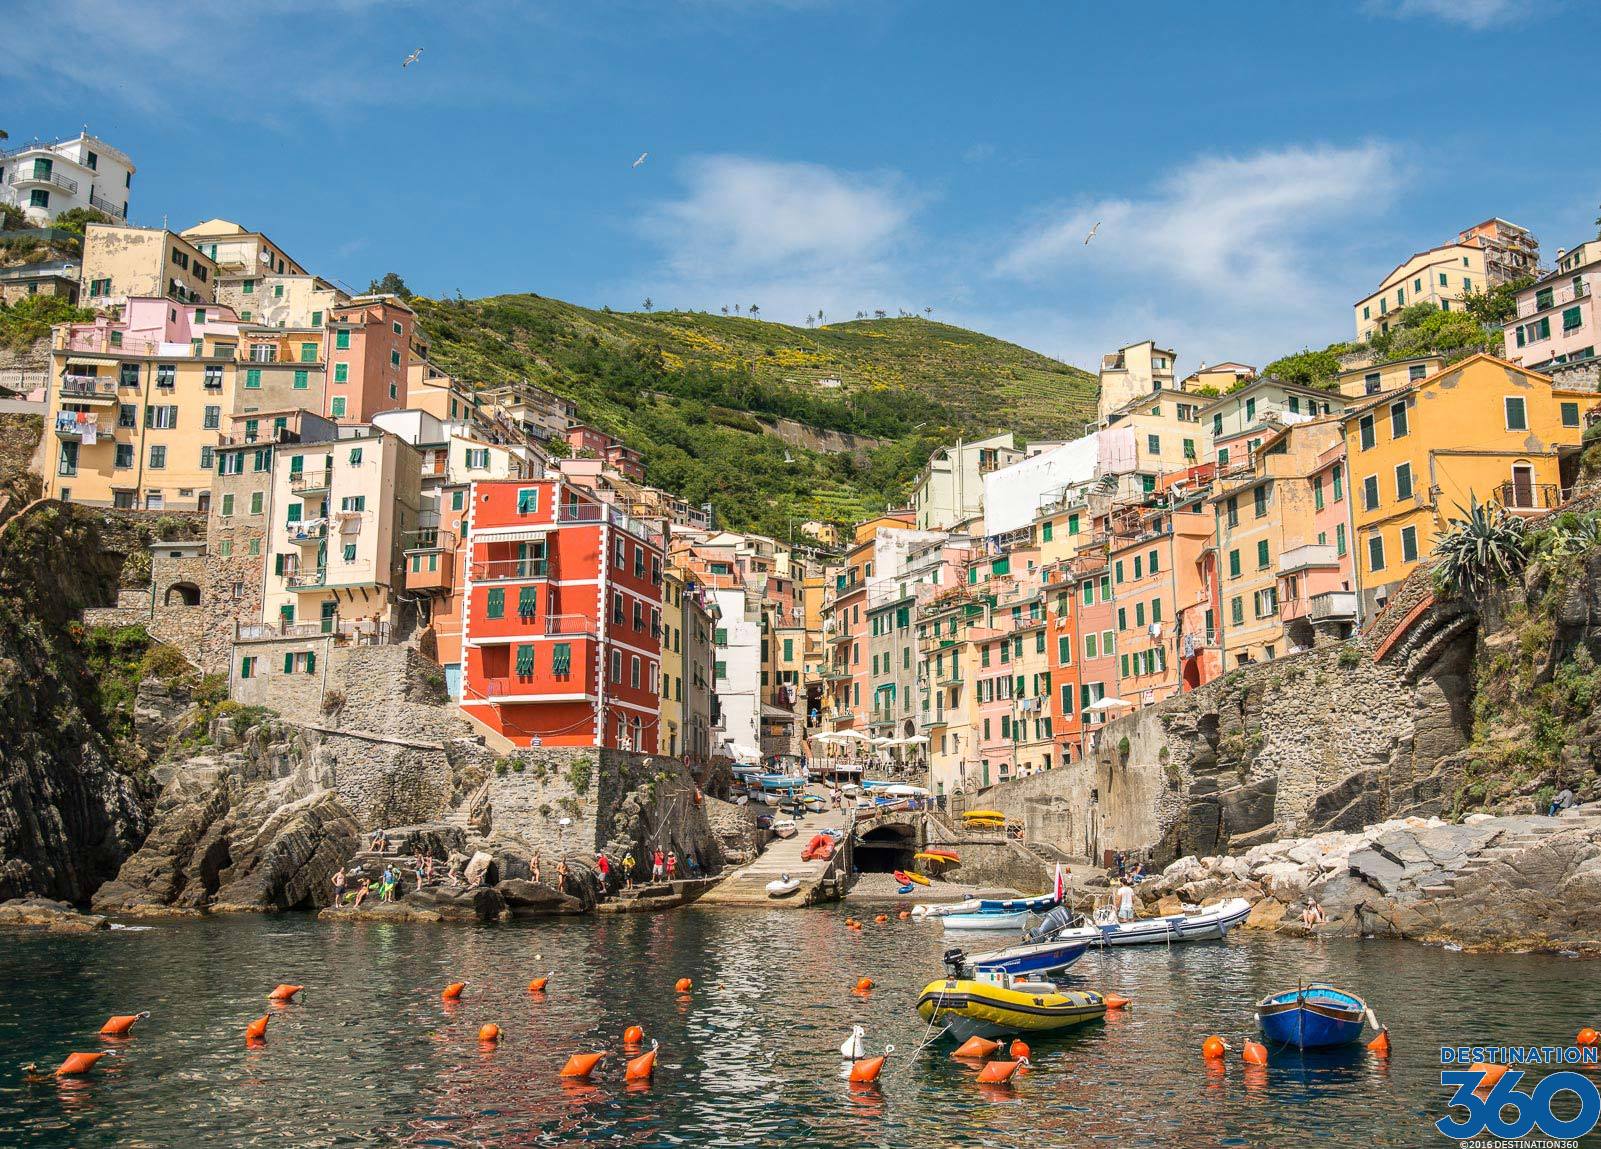 Nice Images Collection: Riomaggiore Desktop Wallpapers